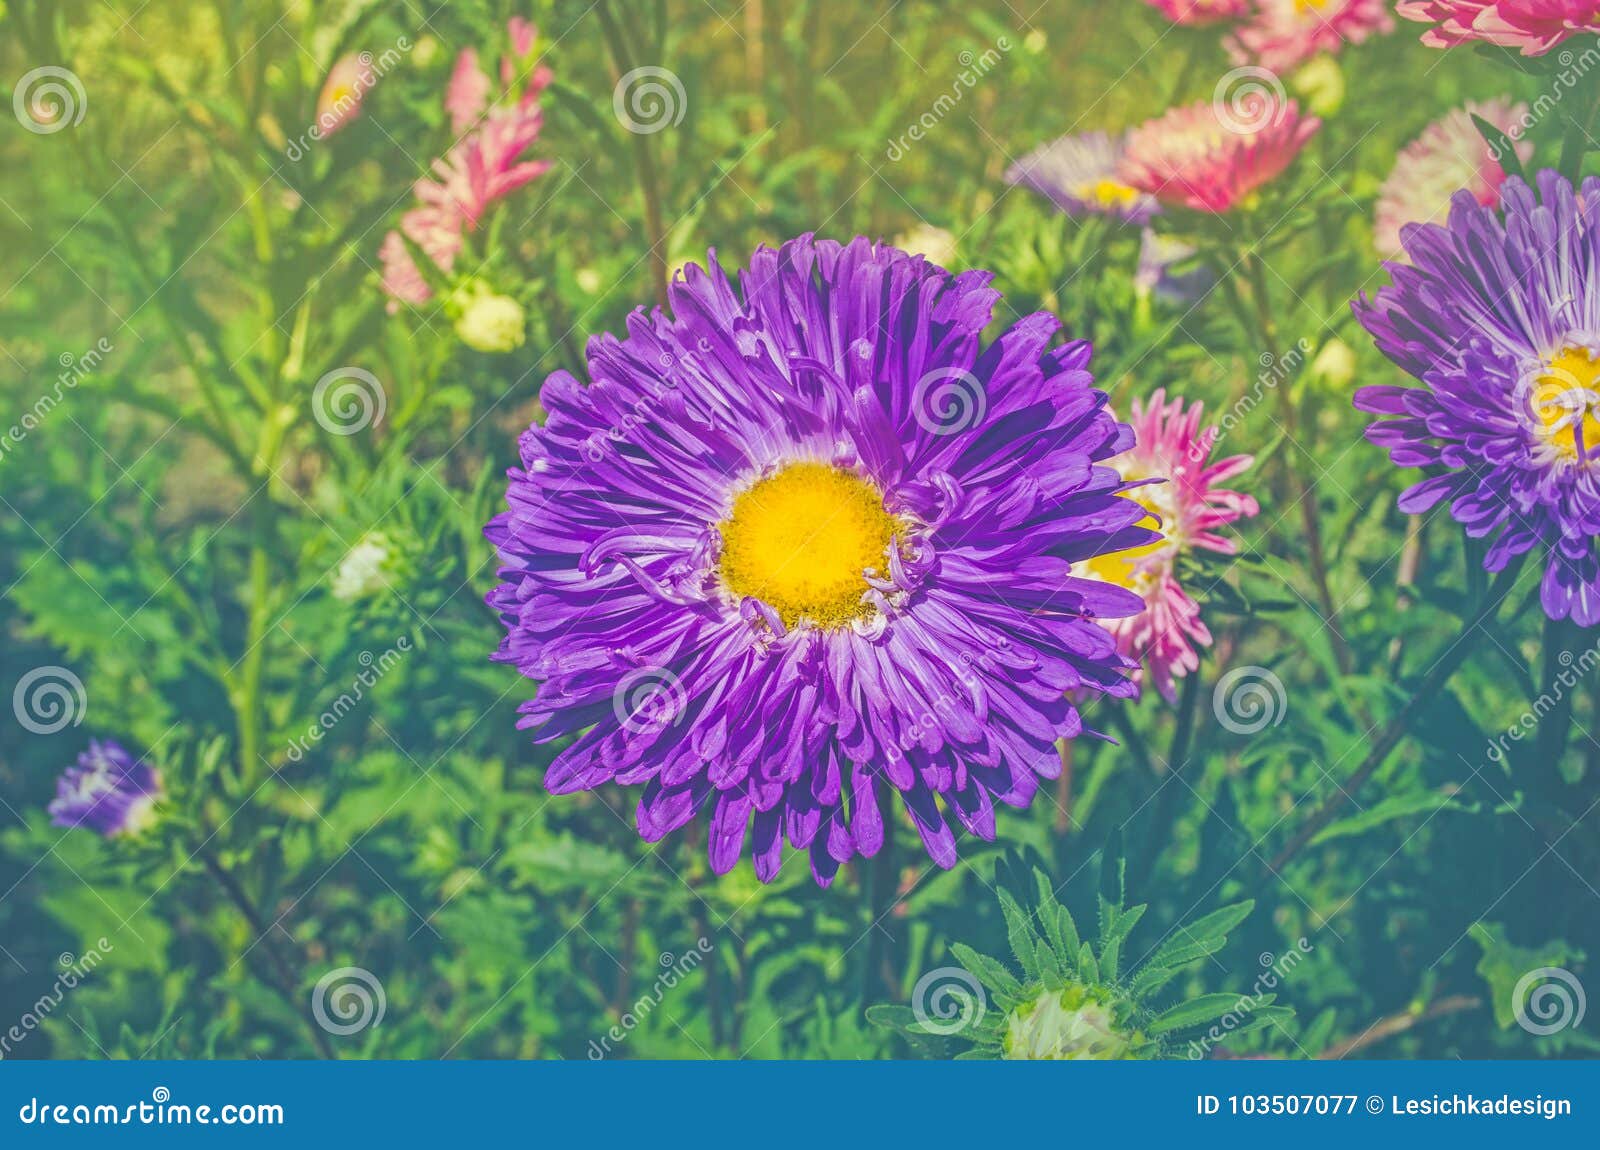 Blue Flower Asters Background With Autumn Blue Aster Stock Image Image Of Bouquet Aster 103507077